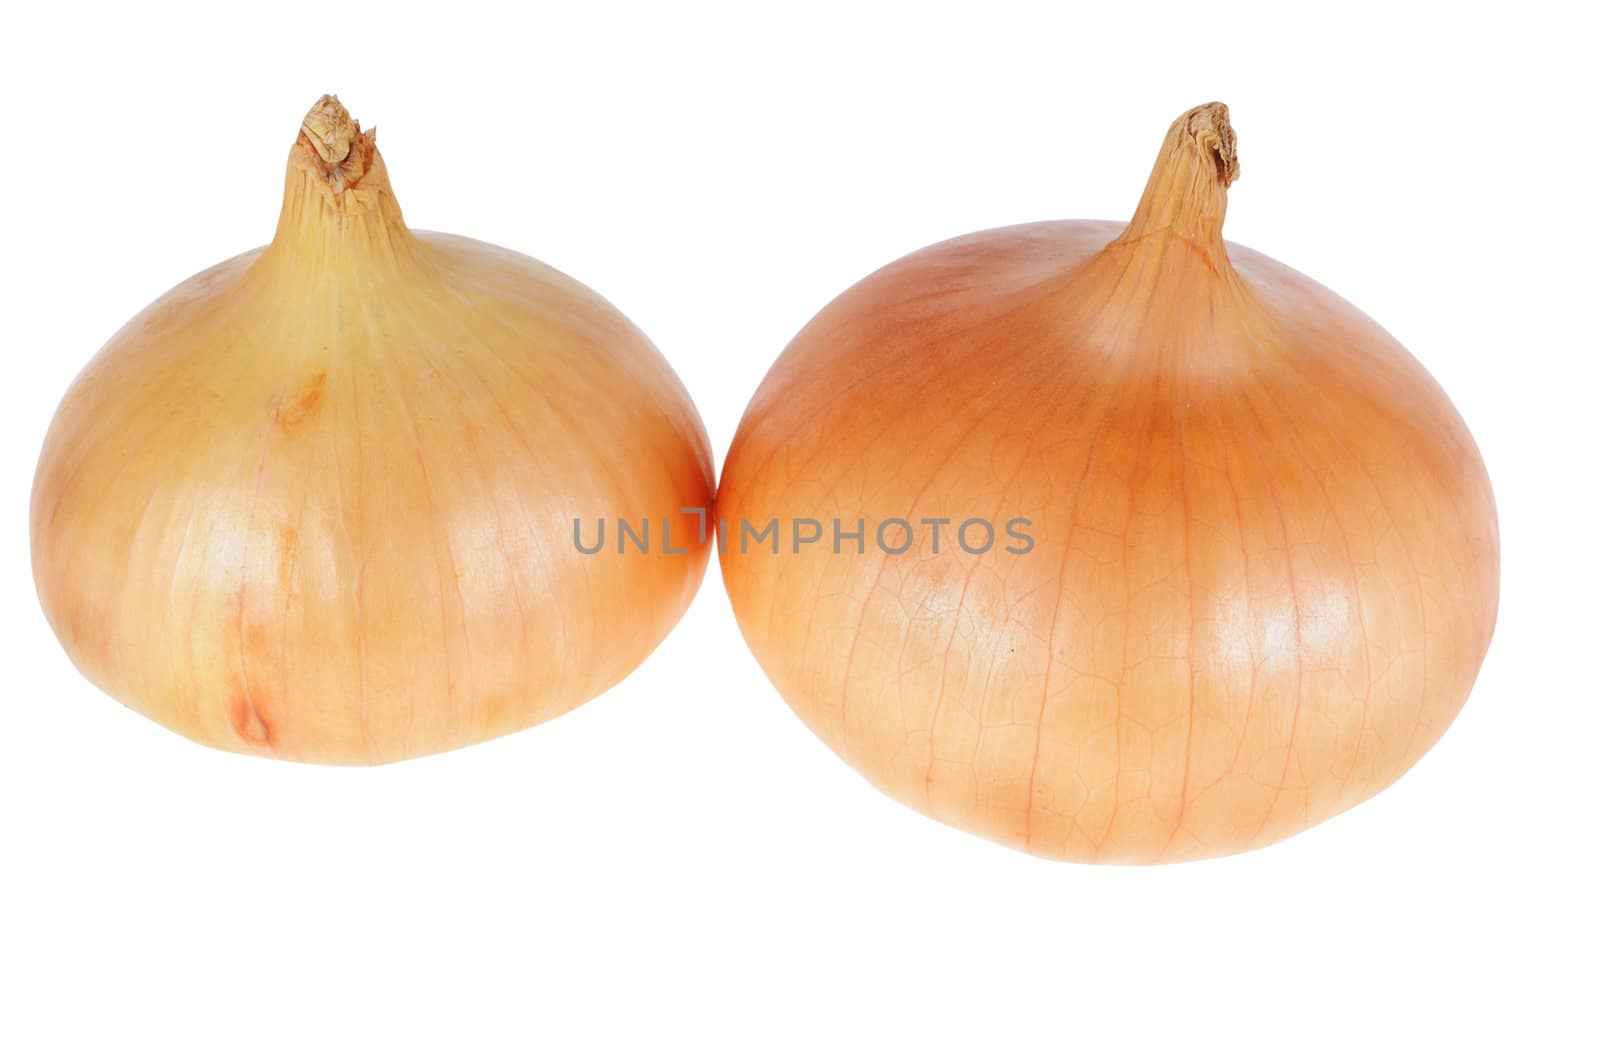 Brown fresh onions isolated on white background